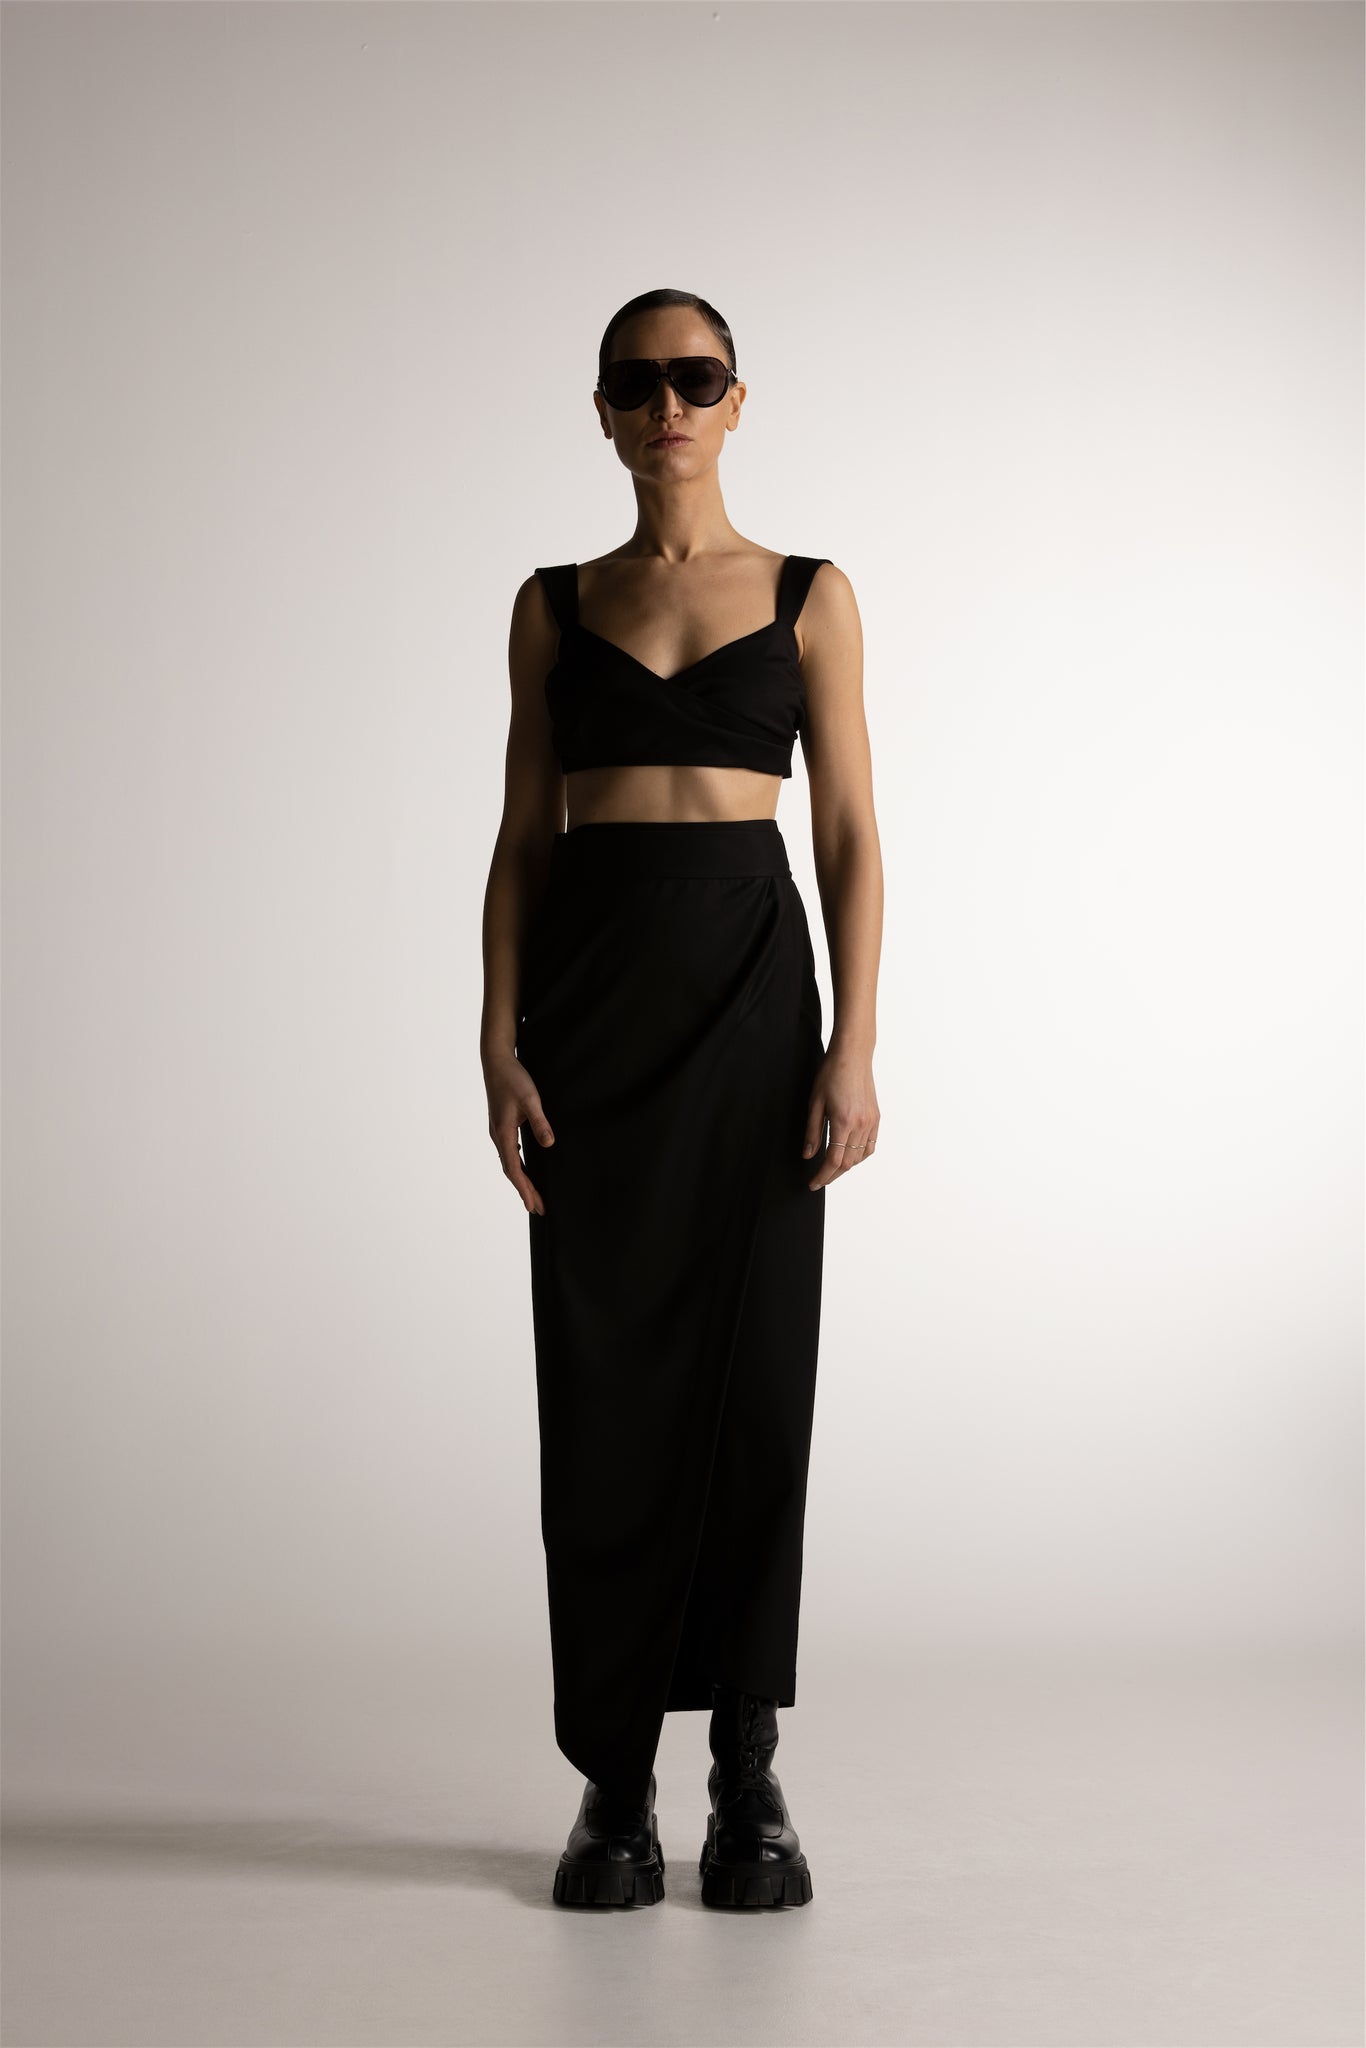 PIXIE WON'T PLAY VENERE WRAP SKIRT BLACK VERSATILE WRAP AROUND DESIGN FLATTERING SILHOUETTE EFFORTLESS STYLE TRENDY COMFORTABLE CHIC FEMININE ADJUSTABLE FIT DAY TO NIGHT WEAR CASUAL ELEGANCE SPRING SUMMER FALL WINTER CAPSULE COLLECTION ESSENTIAL LUXURY HIGH WAISTED DOUBLE WRAP